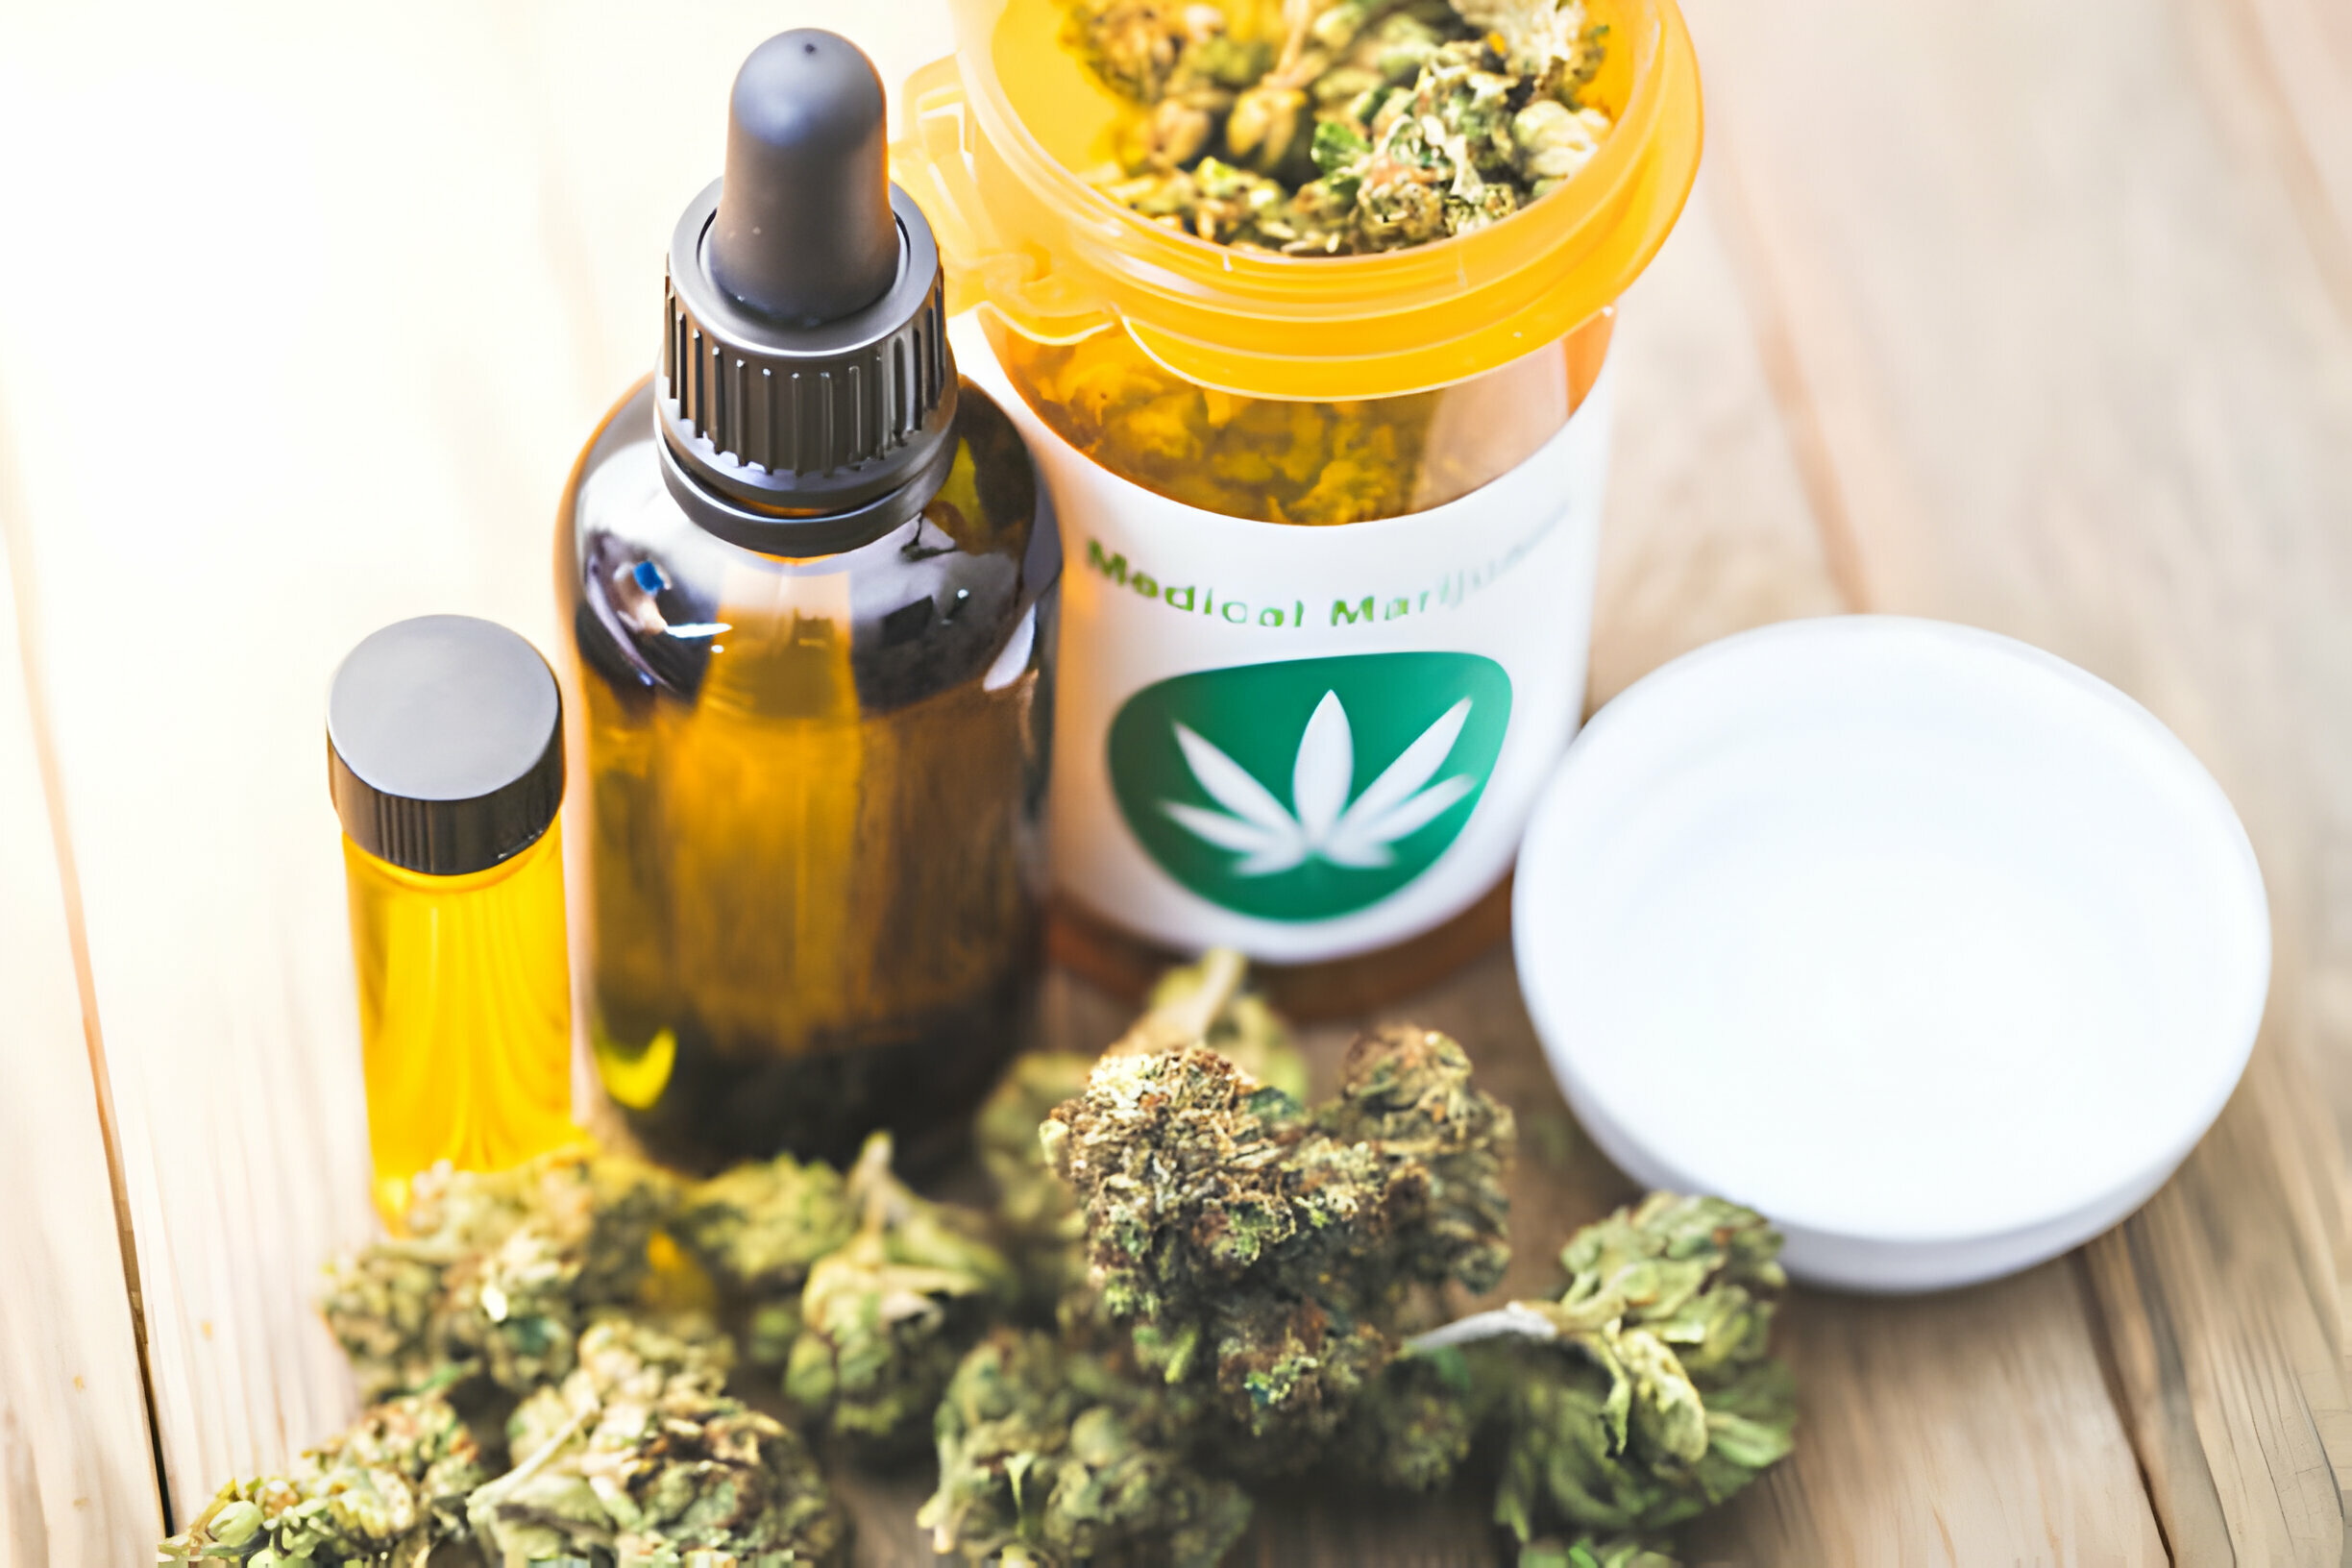 When Plant-Based Medicine Means Medical Cannabis